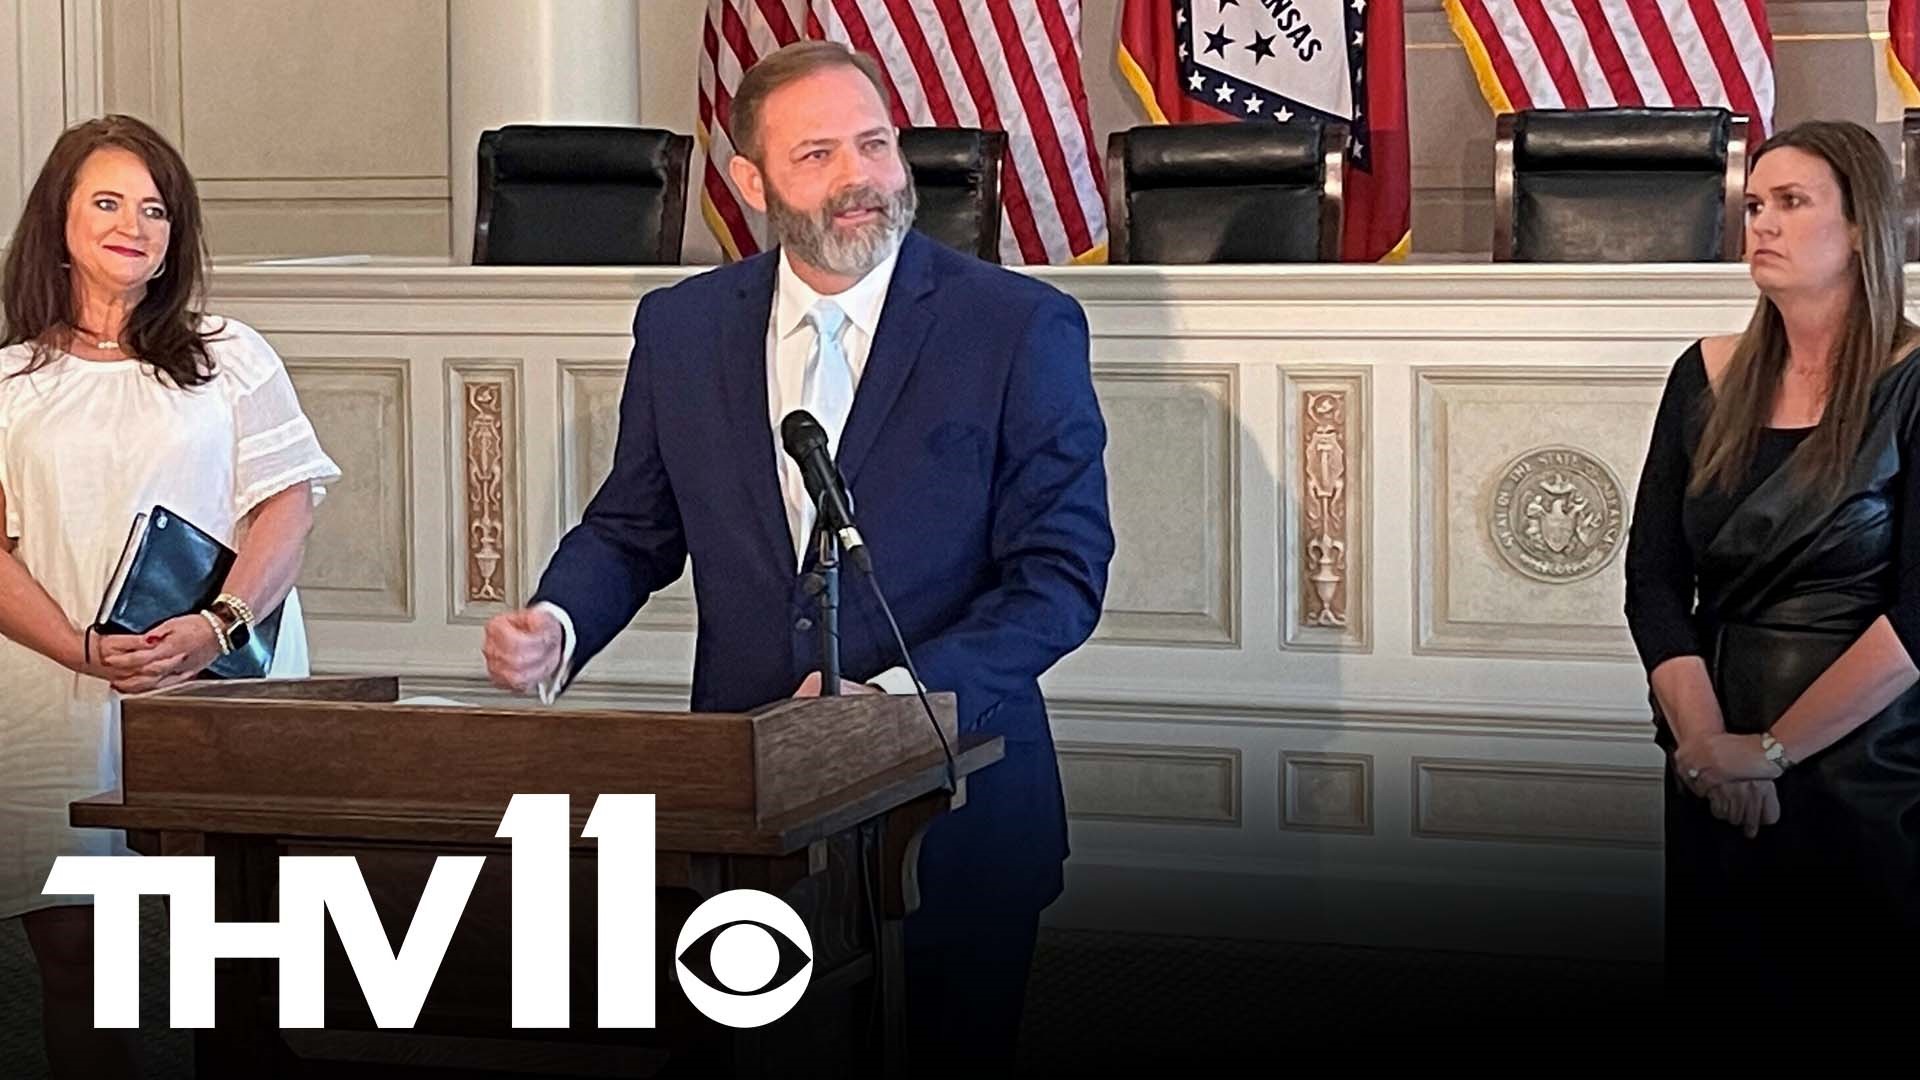 Gov. Sarah Sanders announced that Cody Hiland will serve as the newest member of the Arkansas Supreme Court following the passing of Judge Robin Wynne.